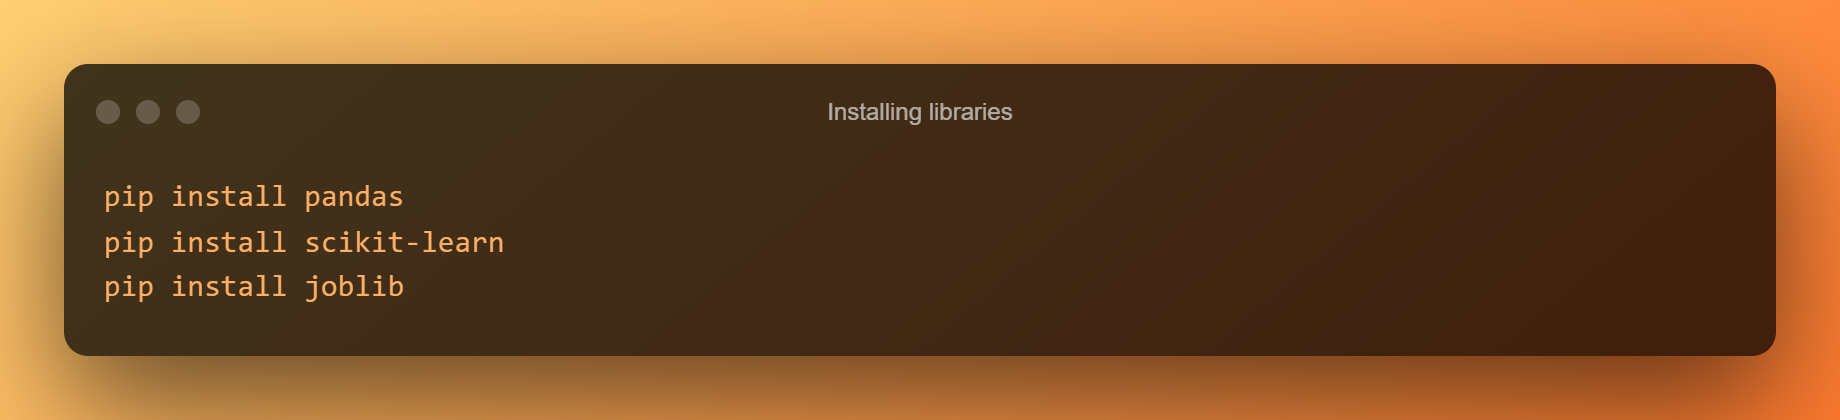 Installing Libraries